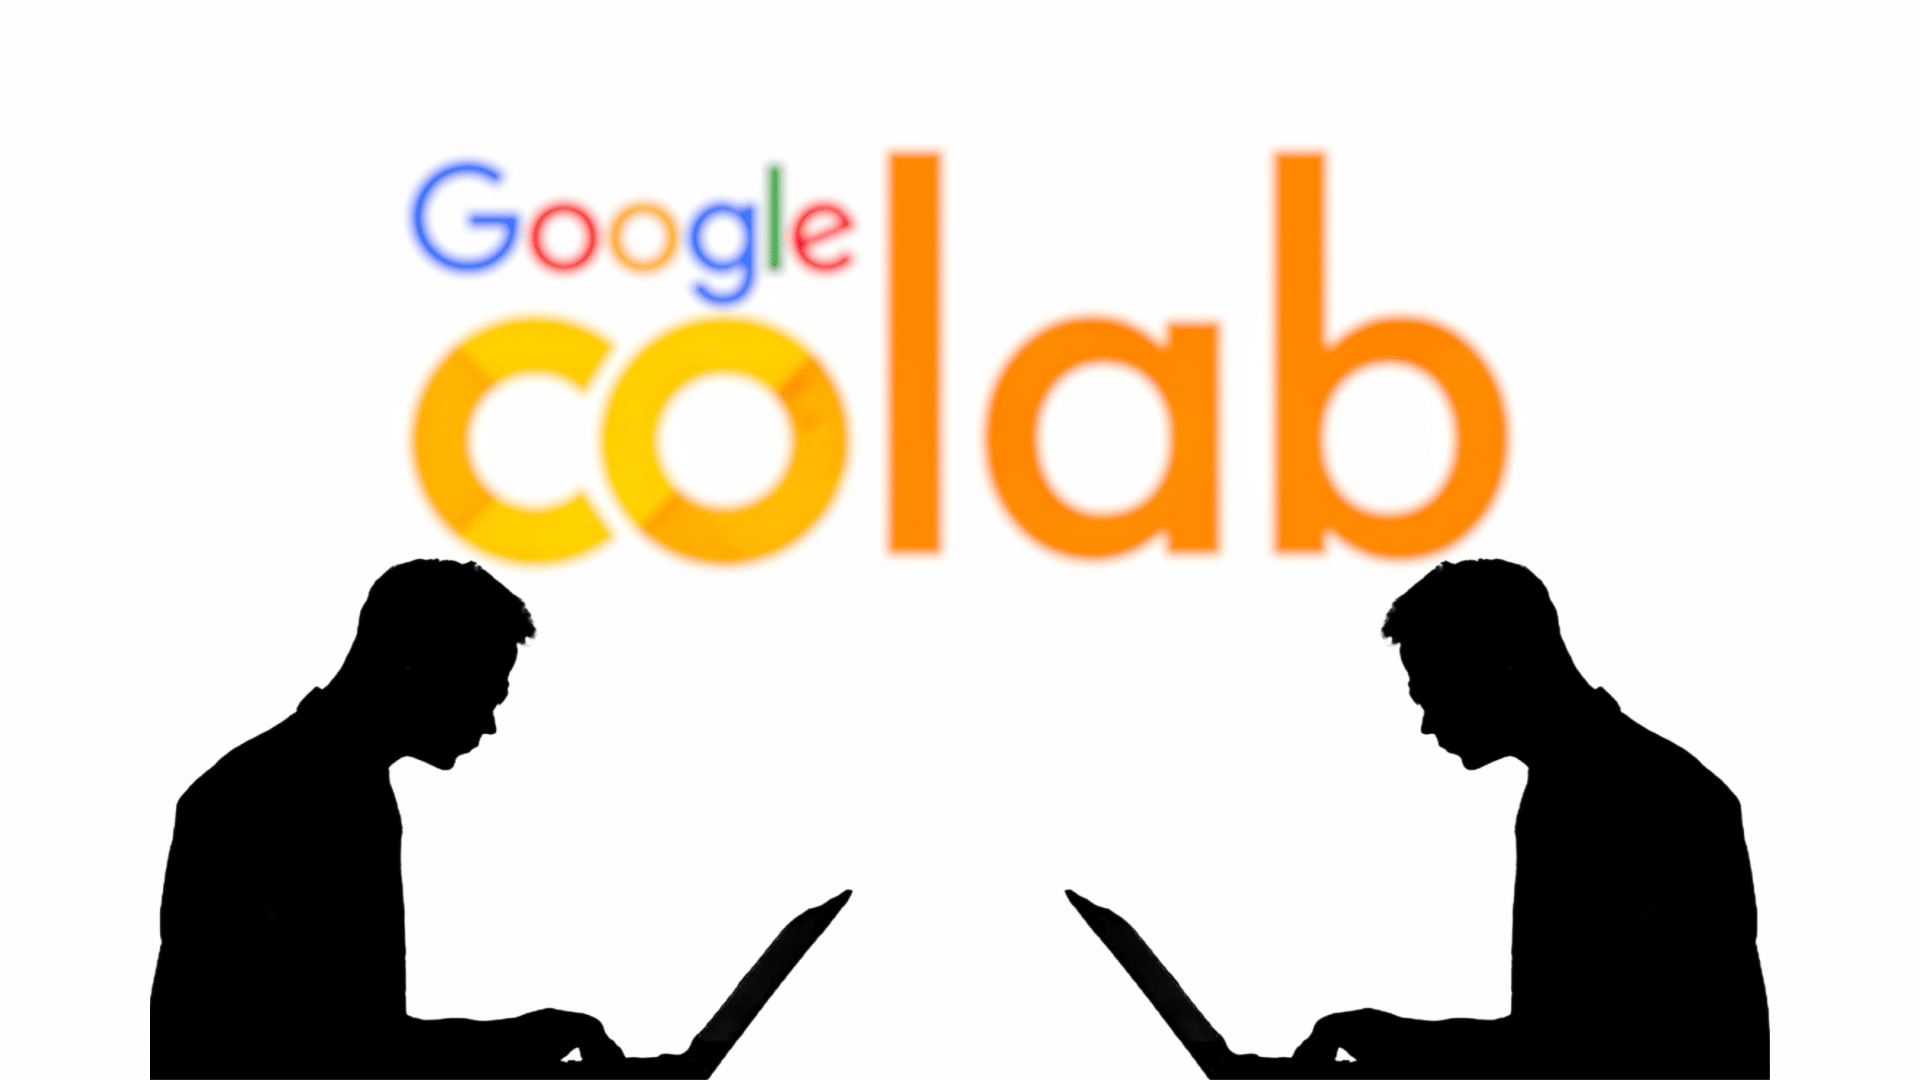 #Google Colab for SEO: How to get started